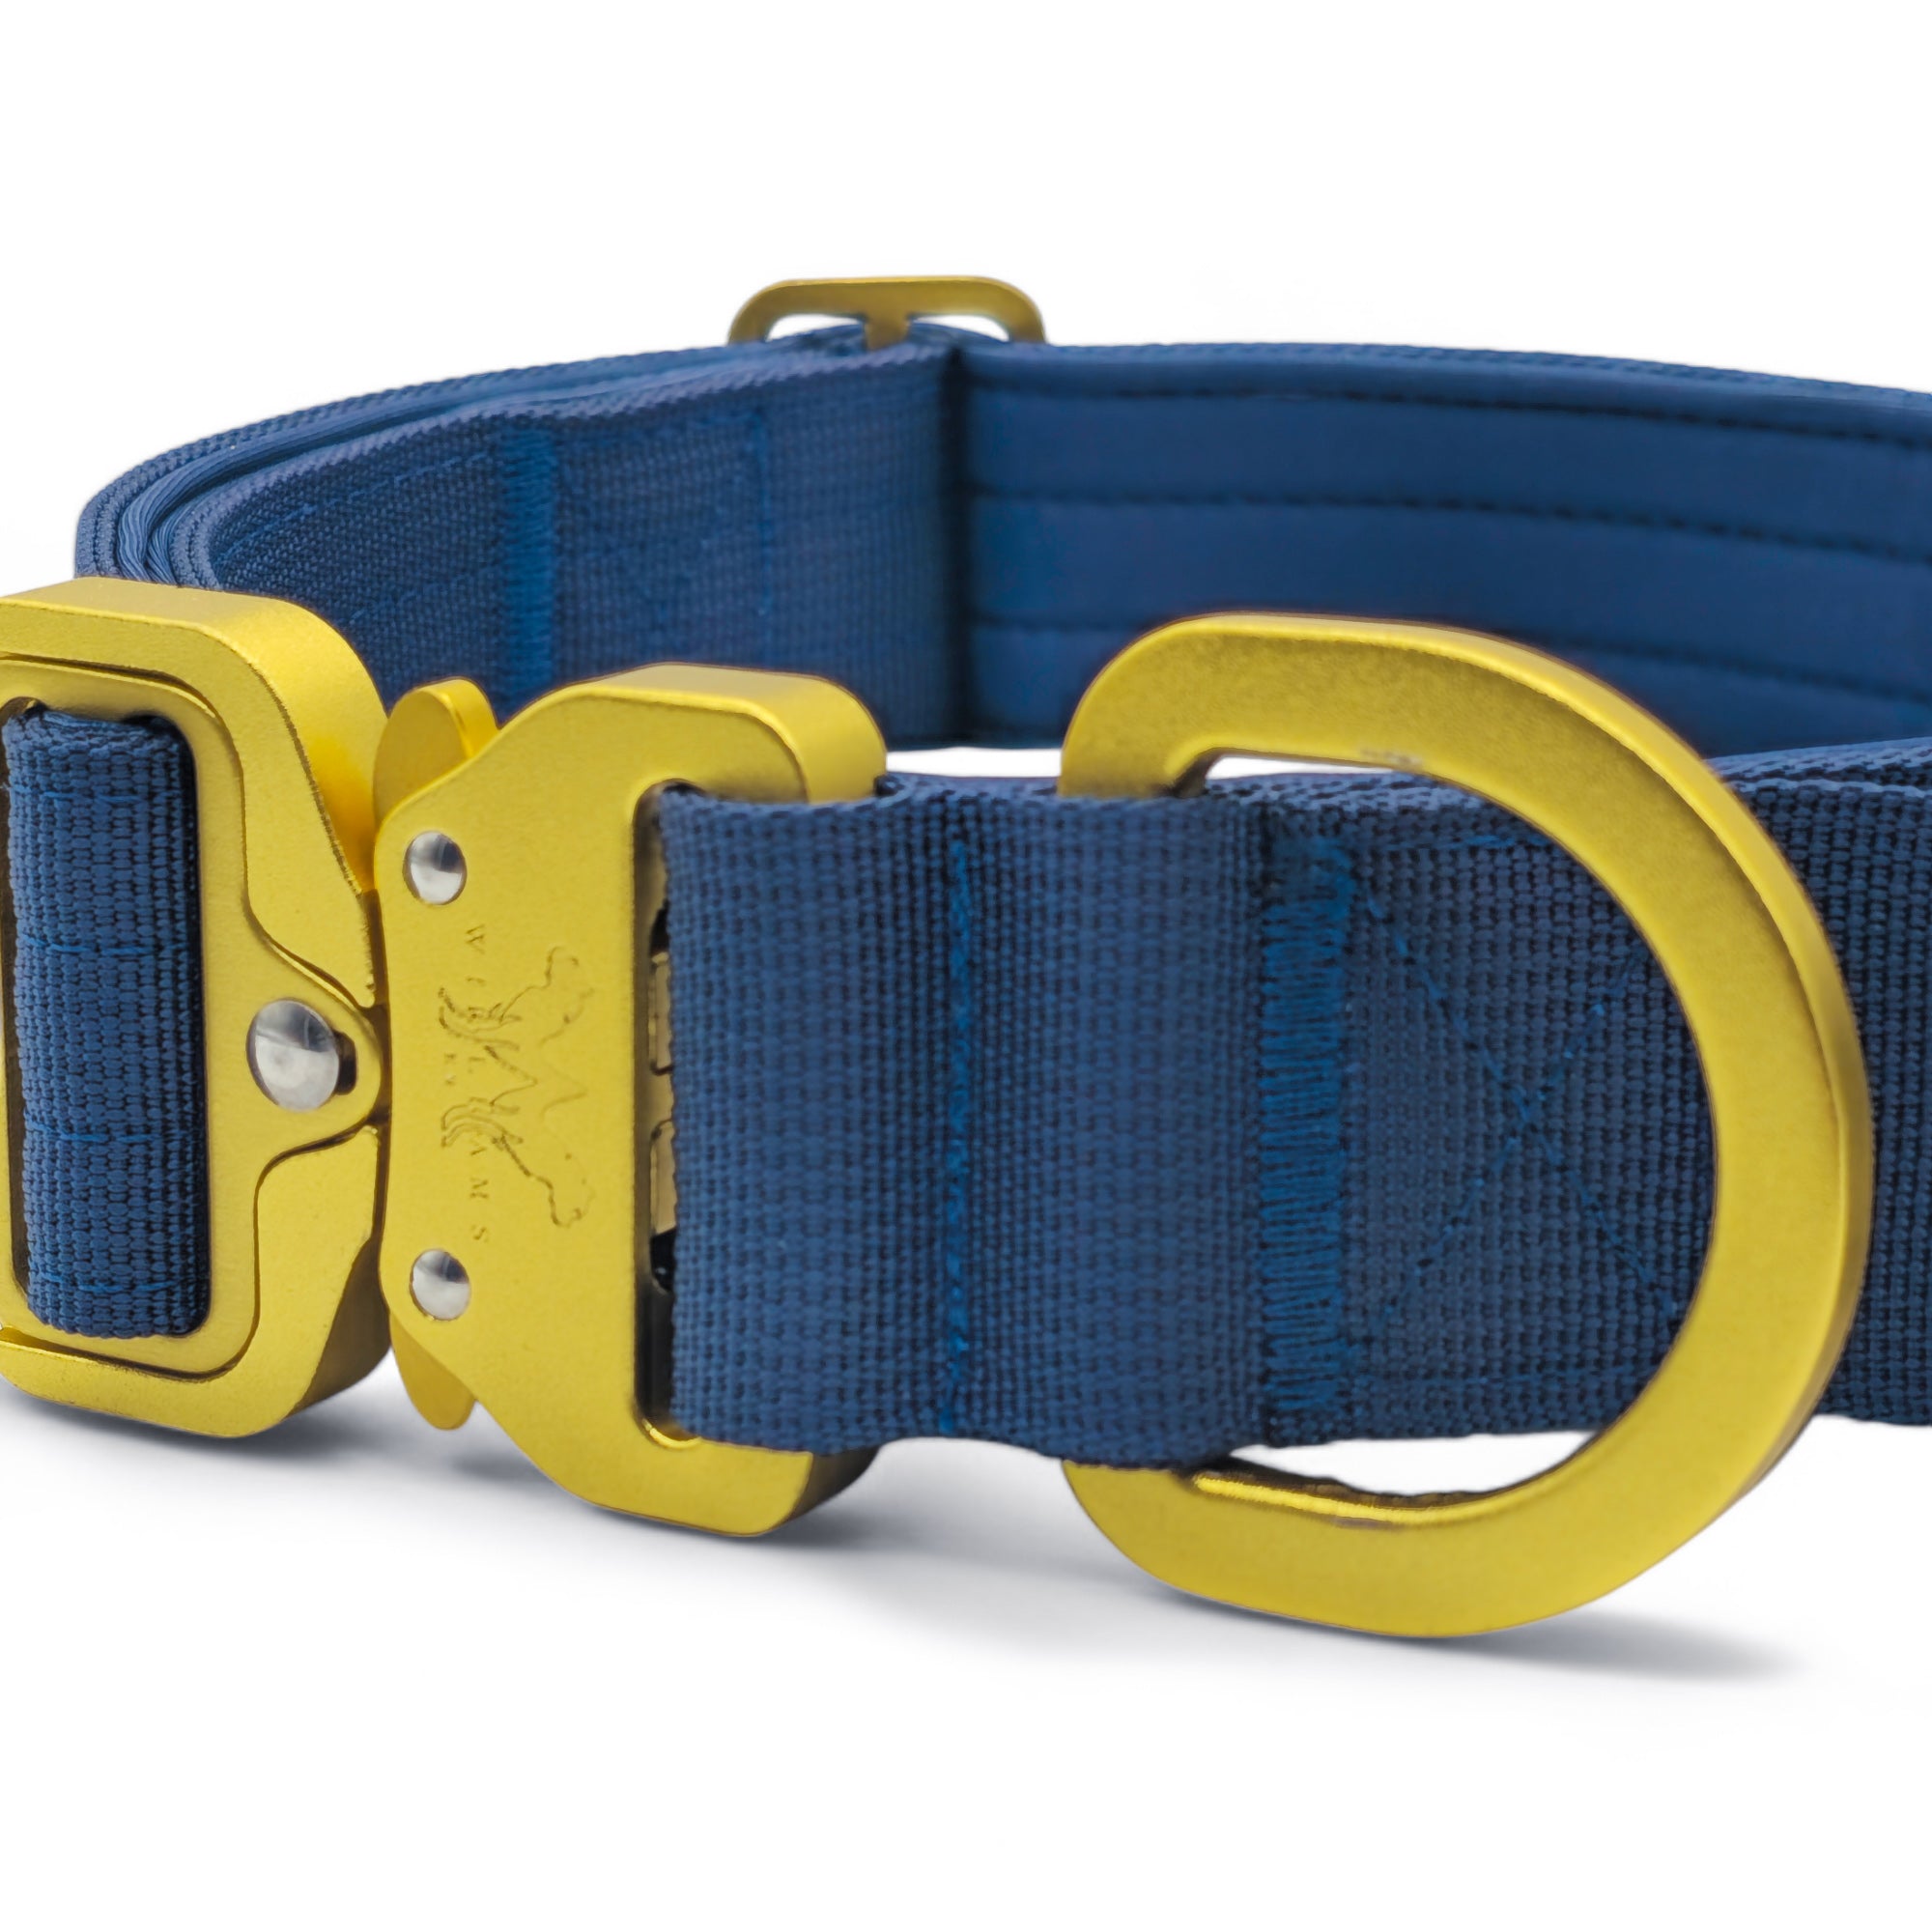 Light Tactical Collar 4CM Royal Blue | Quad Stitched Nylon Lightweight Gold Aluminium Buckle + D Ring Adjustable Collar With Handle